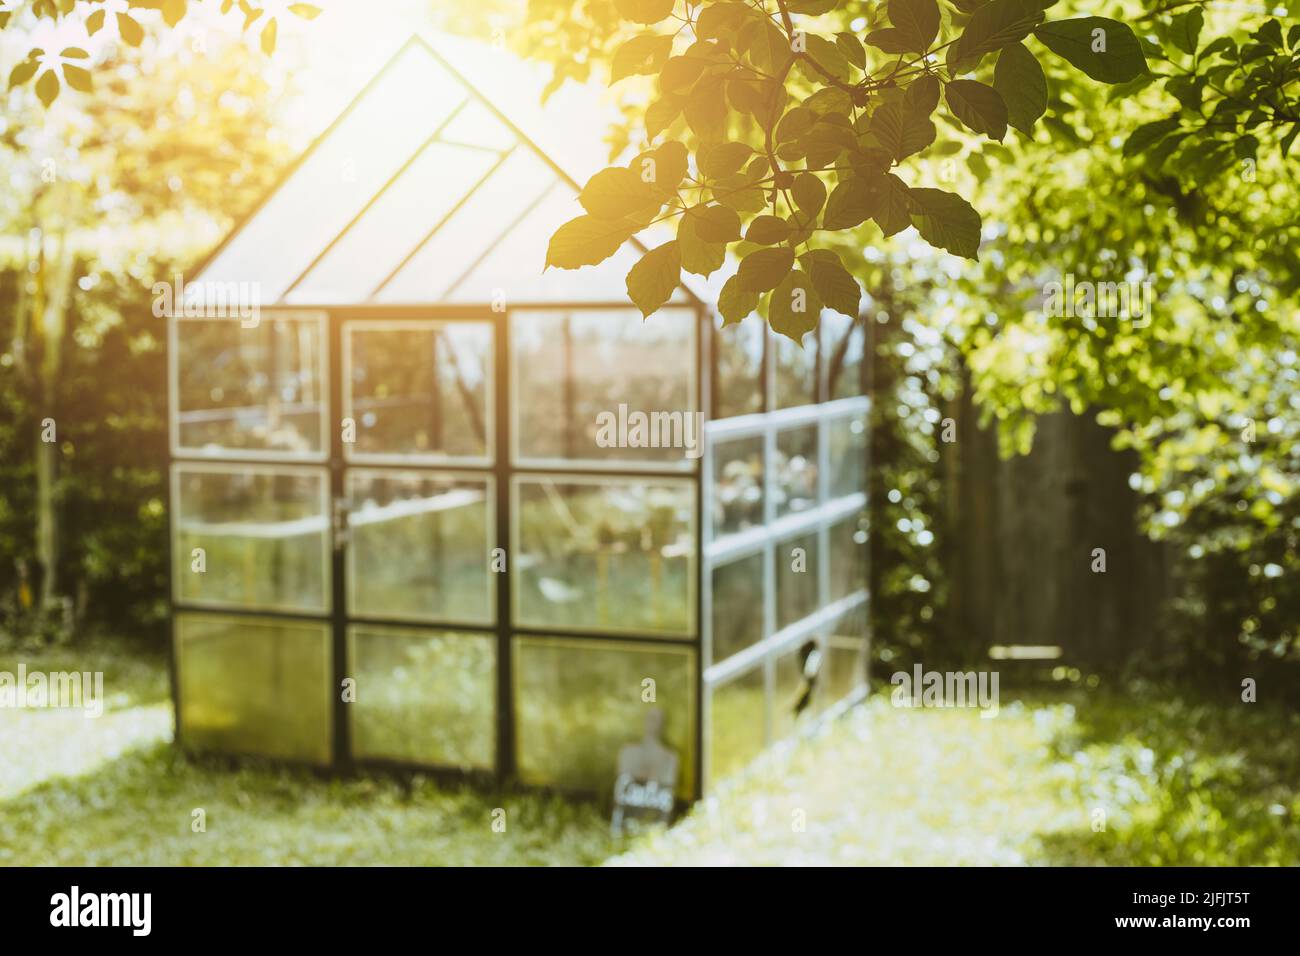 green nature backyard grass tree with glass greenhouse for plant nursery vintage warm color tone. Stock Photo